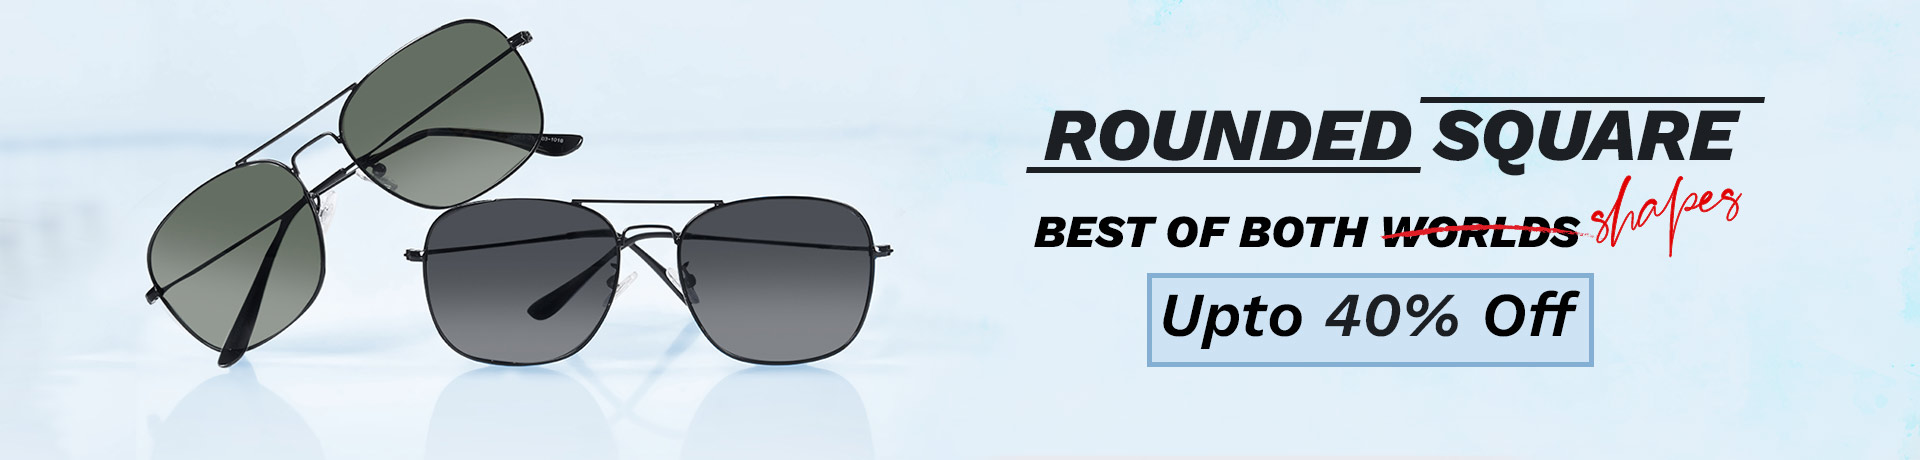 rounded square sunglasses